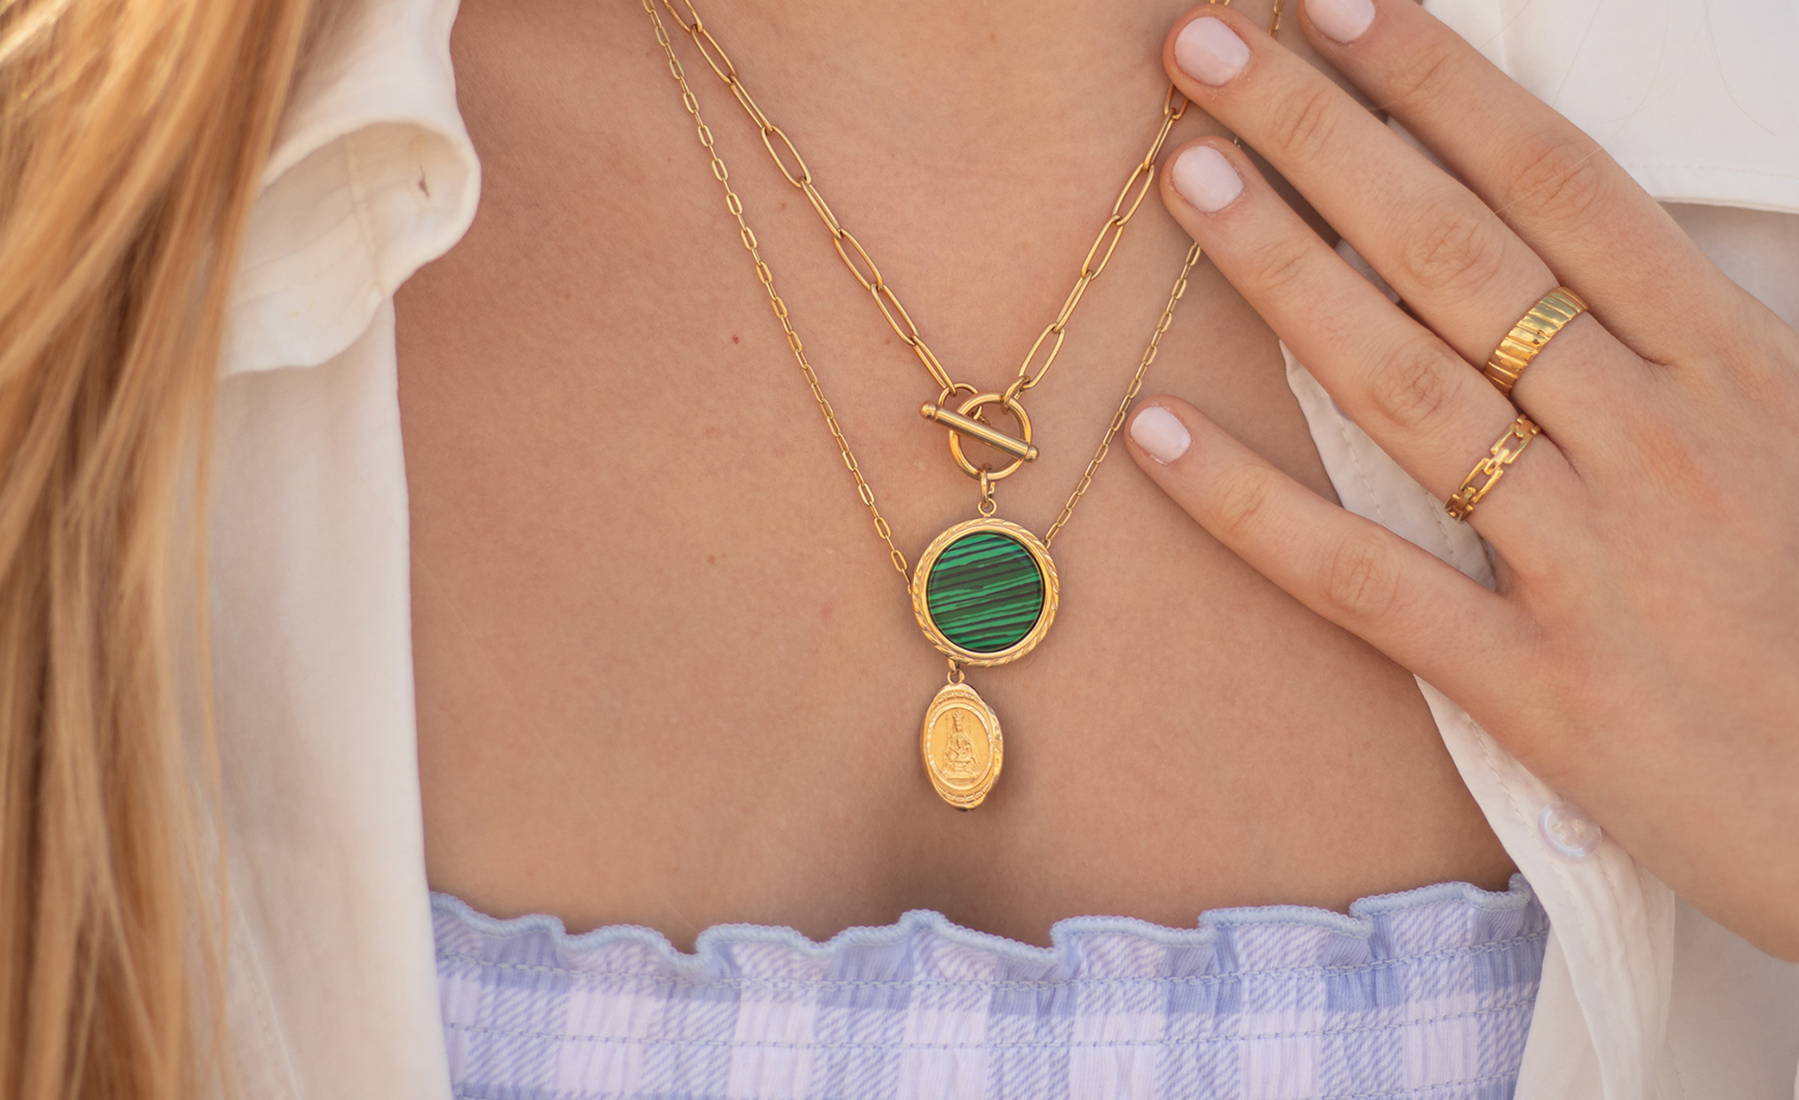 How to Choose the Perfect Chain Necklace For Your Personality Type